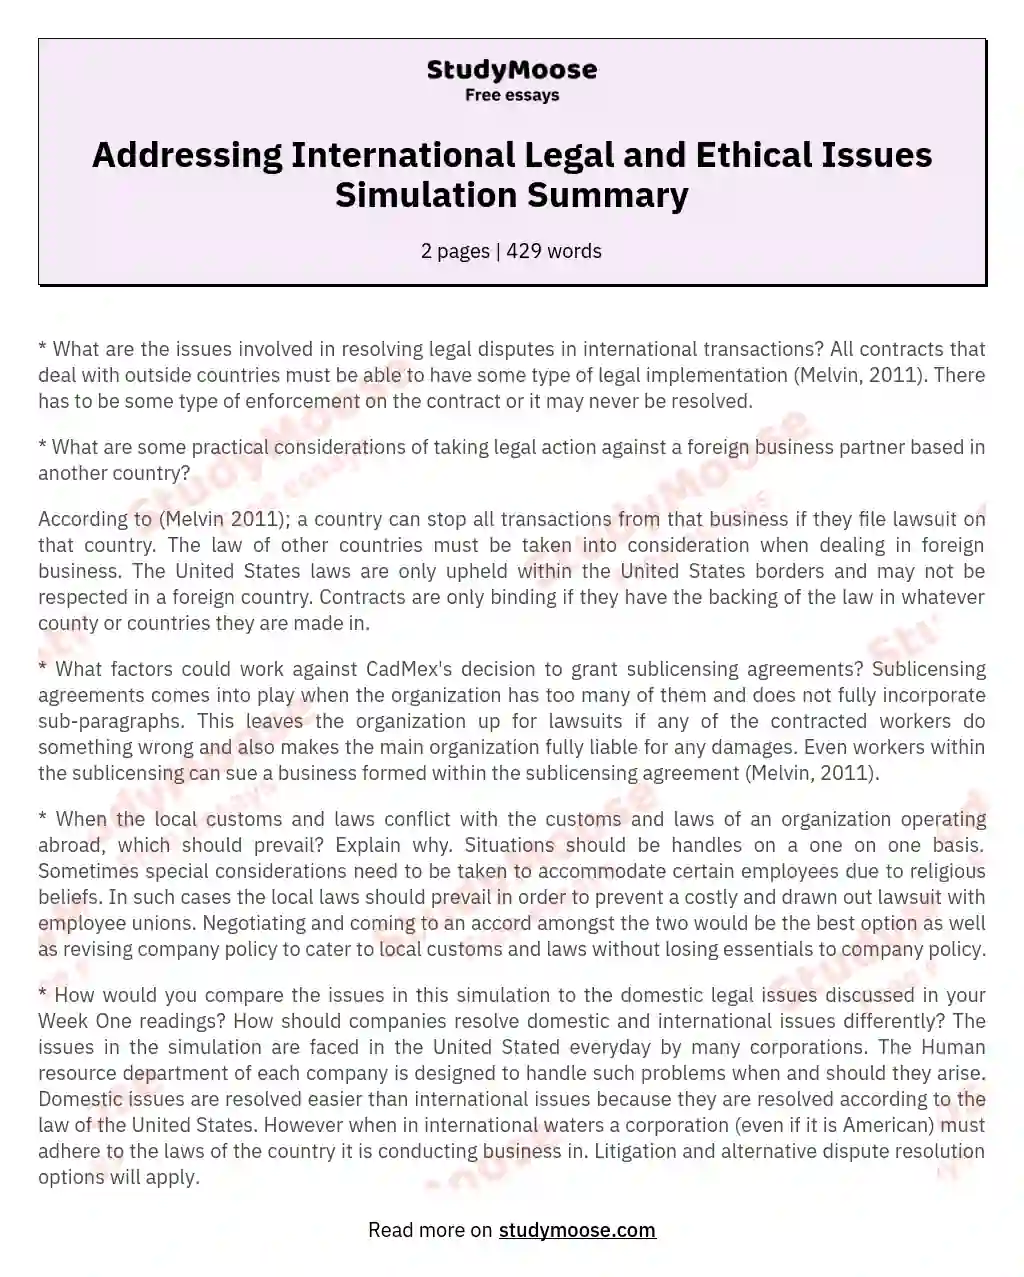 Addressing International Legal and Ethical Issues Simulation Summary essay